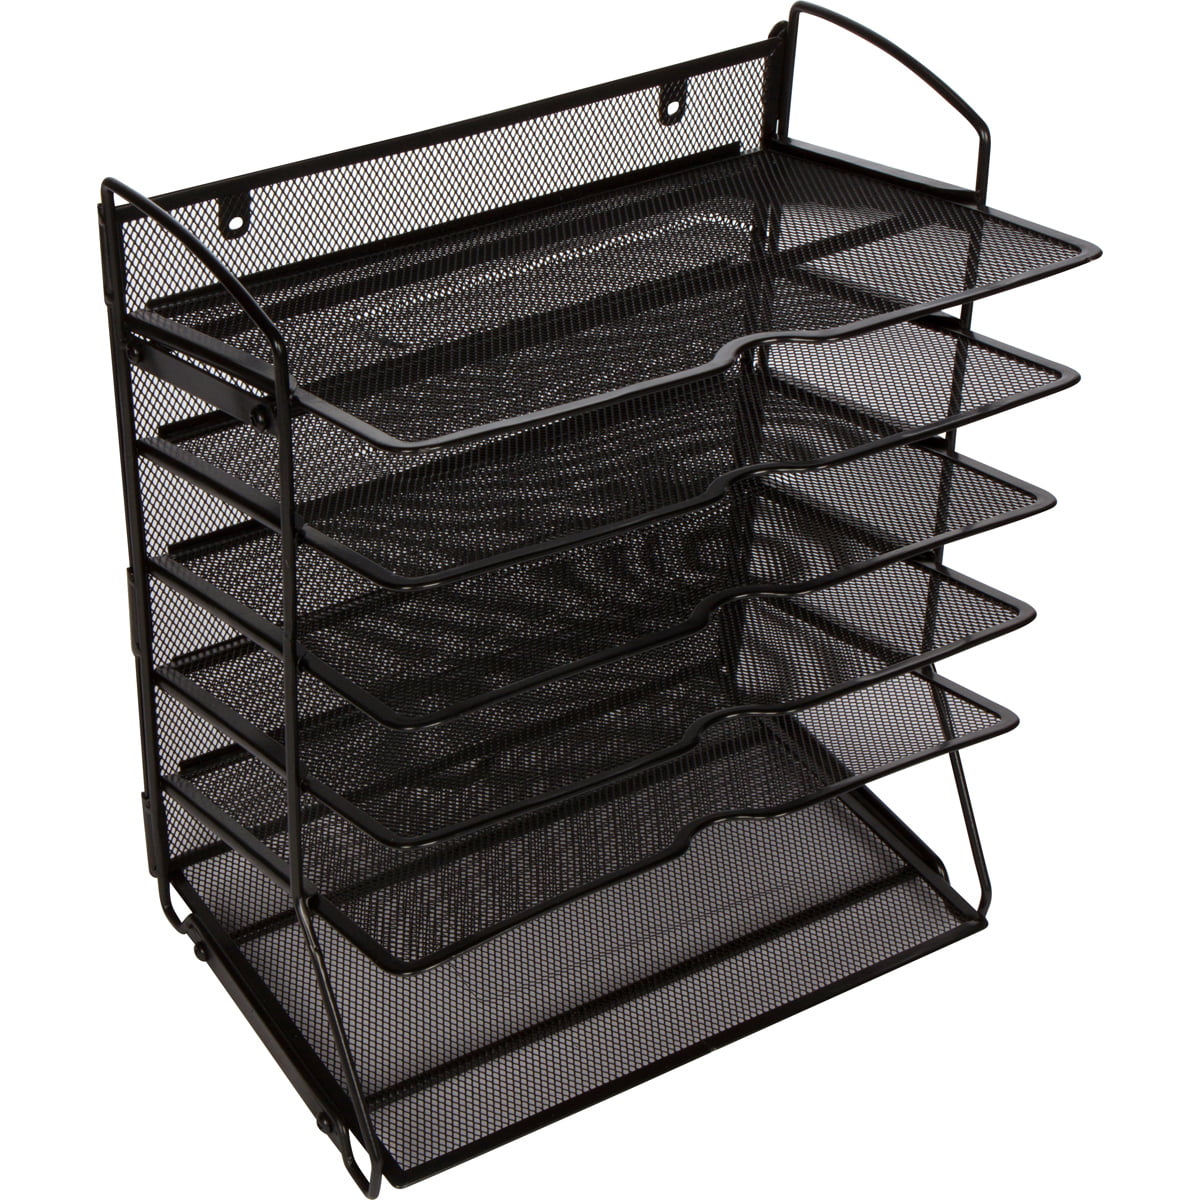 Chrome Plated Klickpick Office Wire Desk File Organizer with 11 Divider Sections Organizers